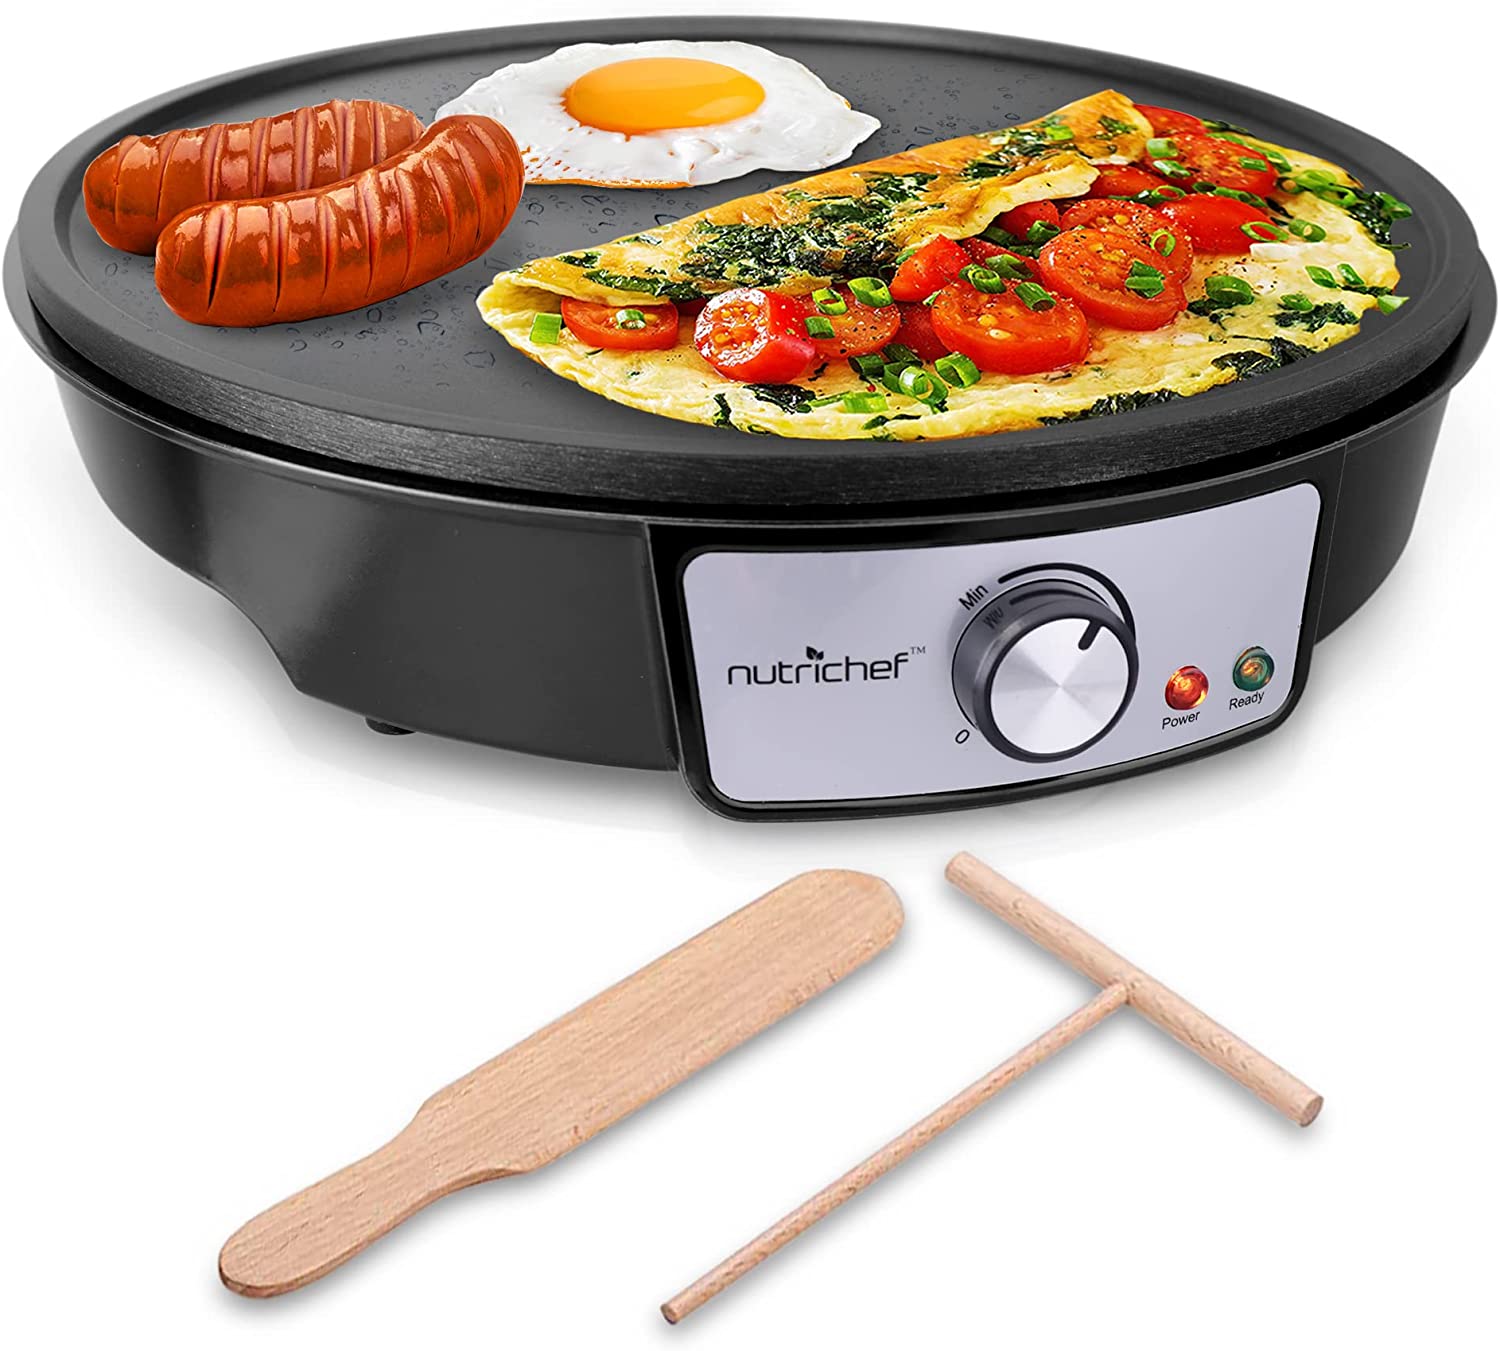 NutriChef Compact Electric Crepe & Pancake Maker